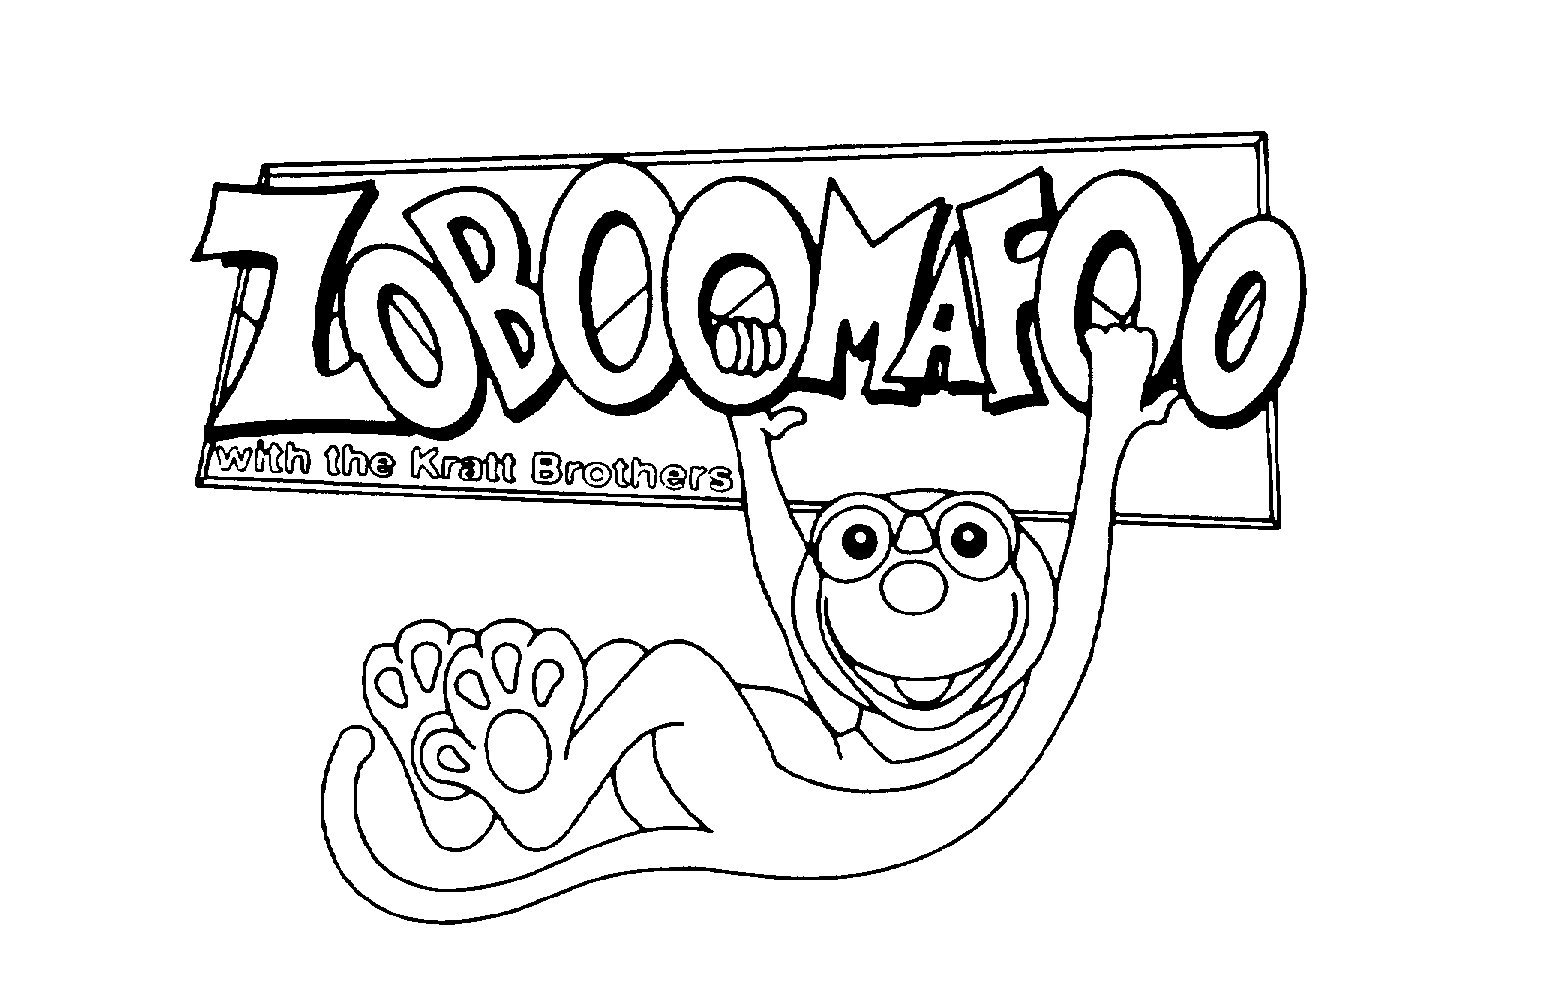 ZOBOOMAFOO WITH THE KRATT BROTHERS